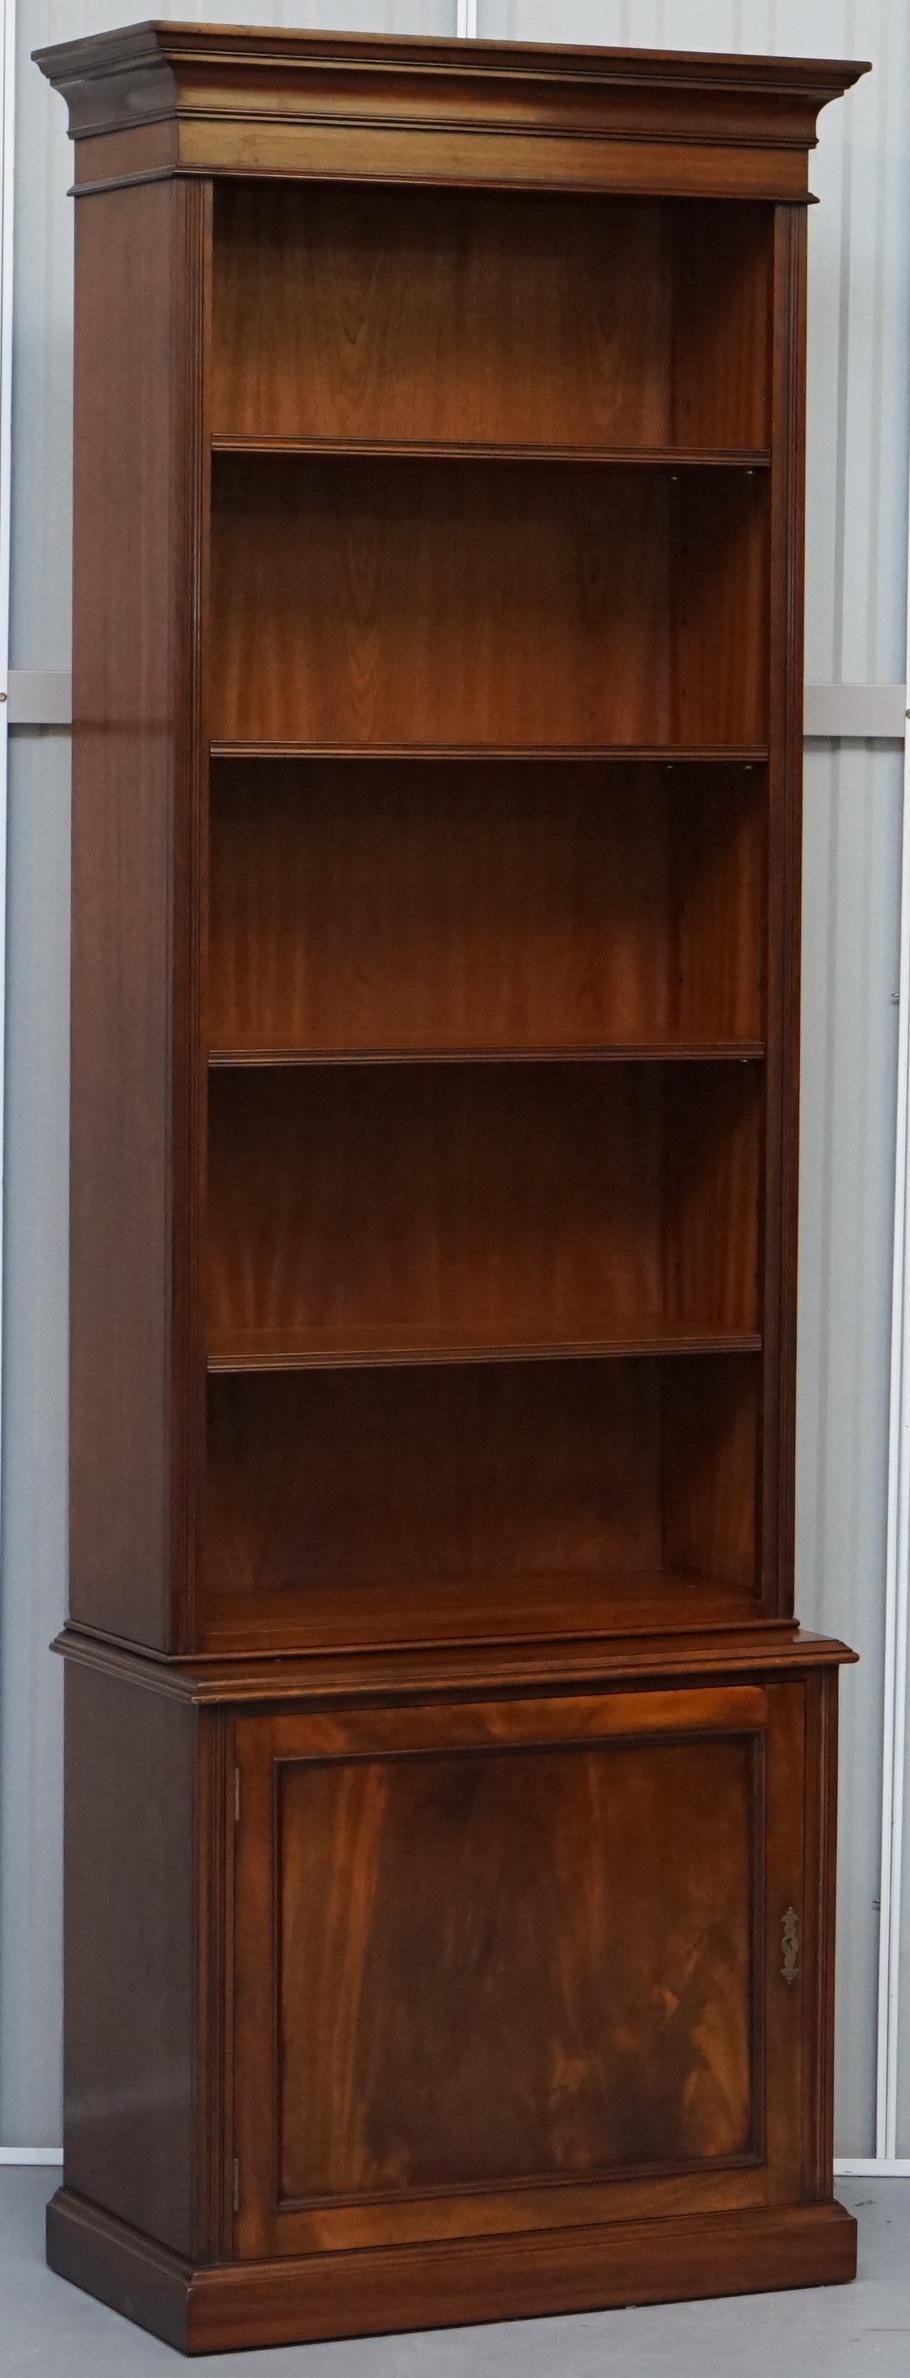 Victorian Lovely Pair of Vintage Flamed Mahogany Library Bookcases with Cupboard Bases